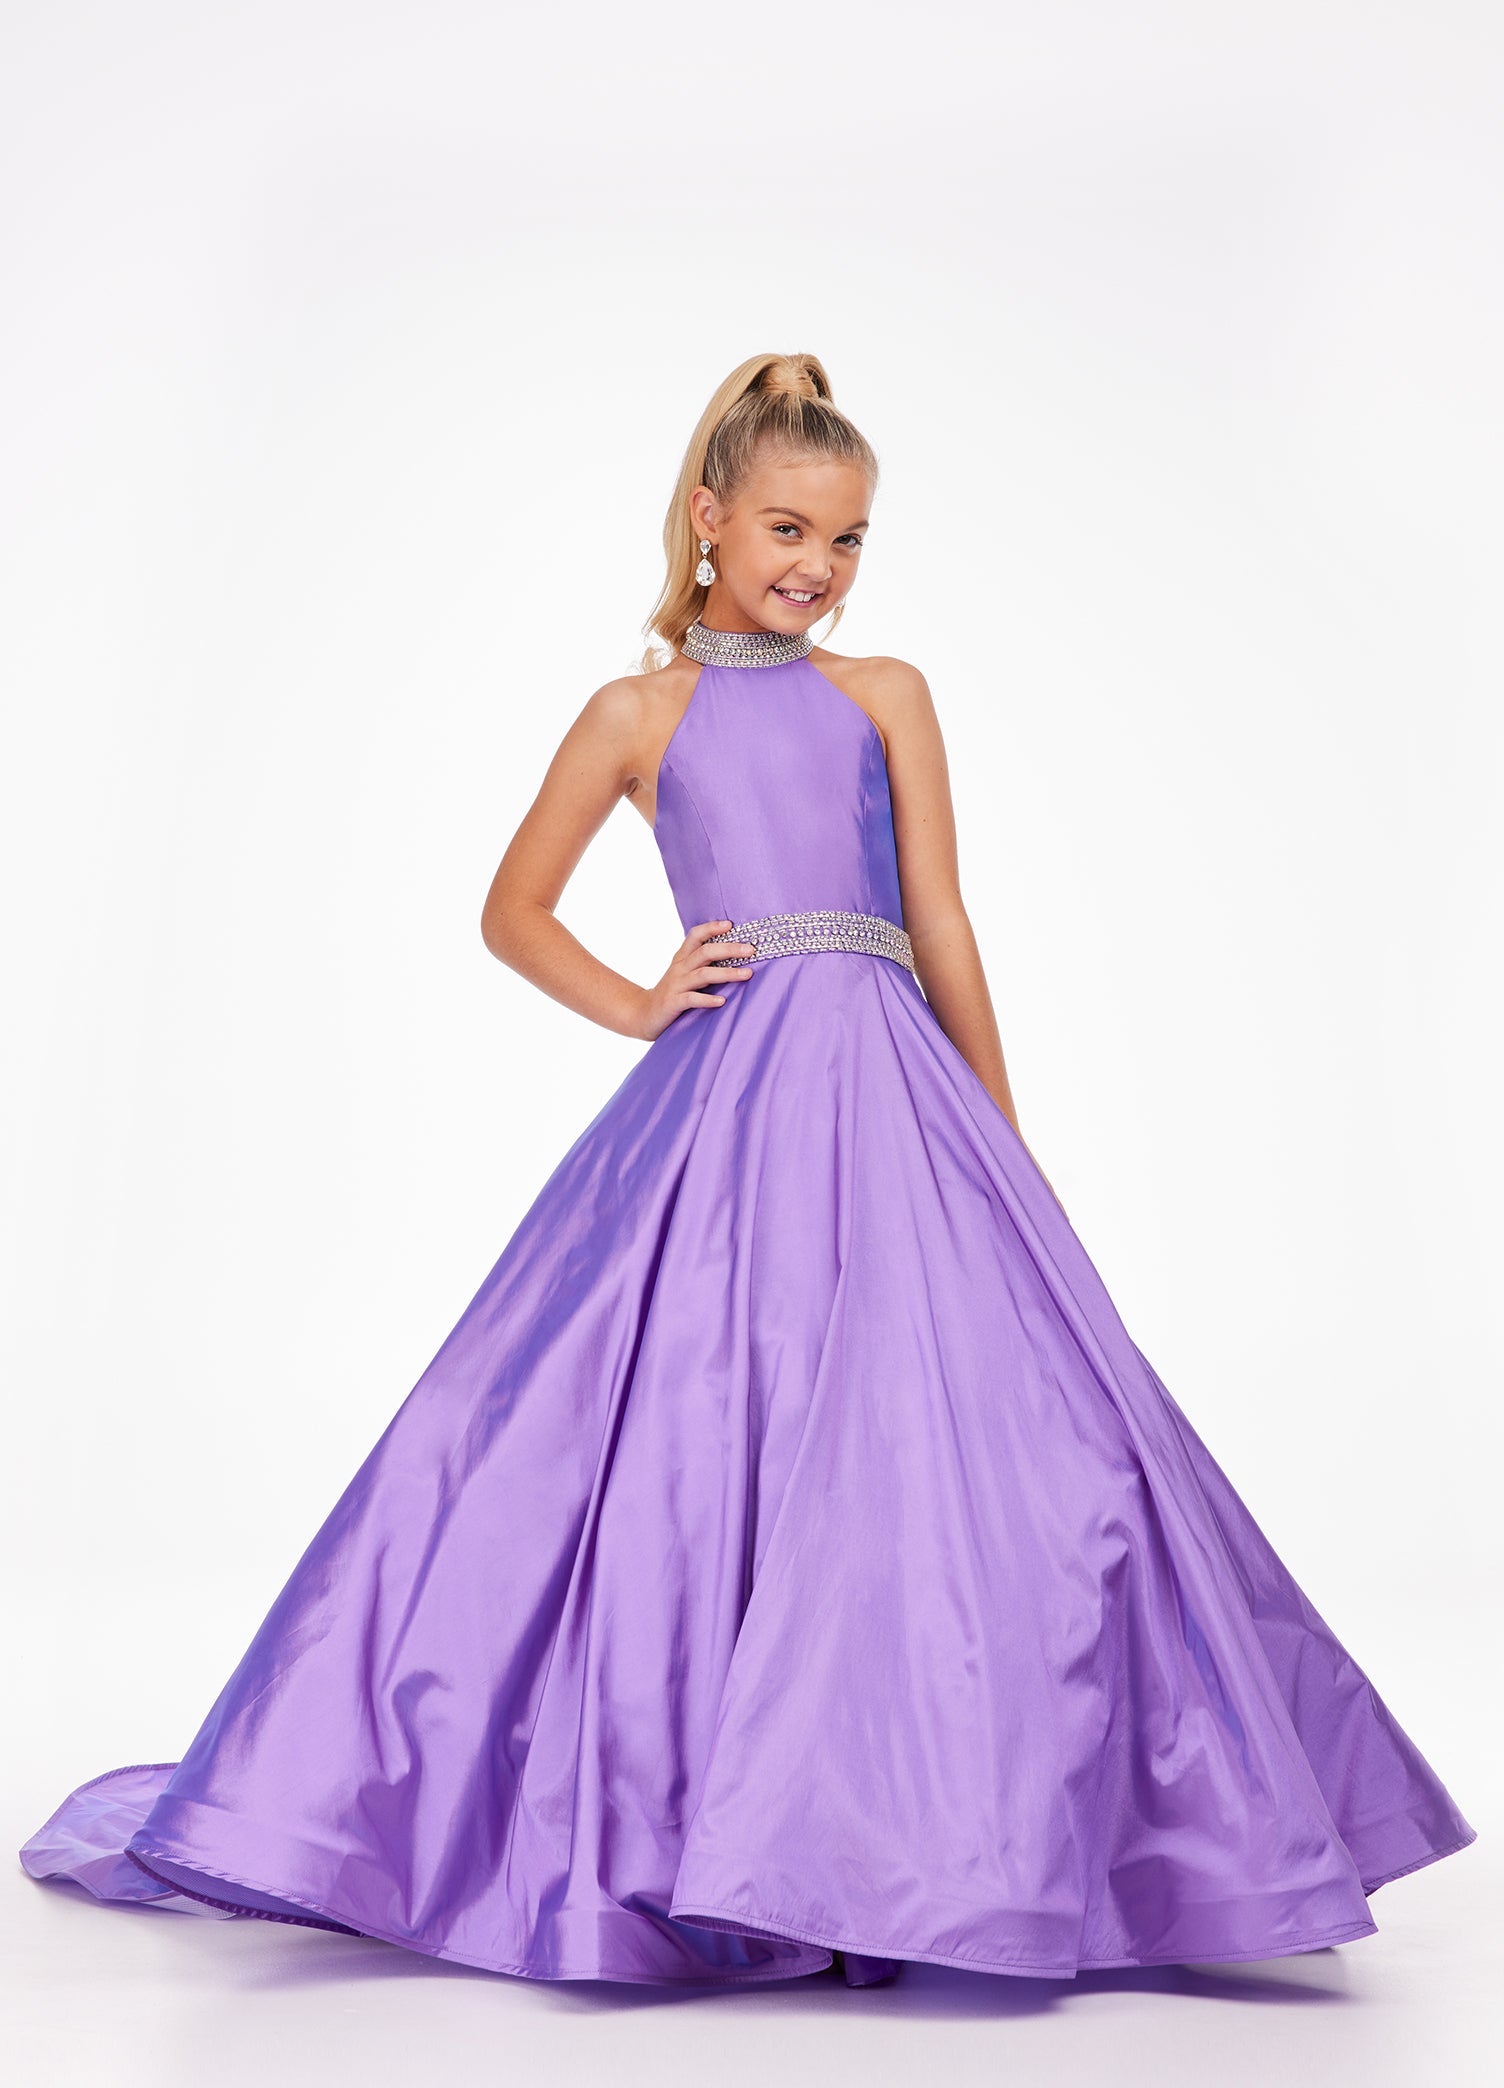 Ashley Lauren Kids 8117 This simple yet sophisticated girls and preteen pageant dress features a halter neckline with beaded collar. The same bead pattern is carried down onto the waist giving way to a full A-Line skirt with sweeping train.  Available colors:  Fuchsia, Purple  Available sizes:  4, 6, 8, 10, 12, 14